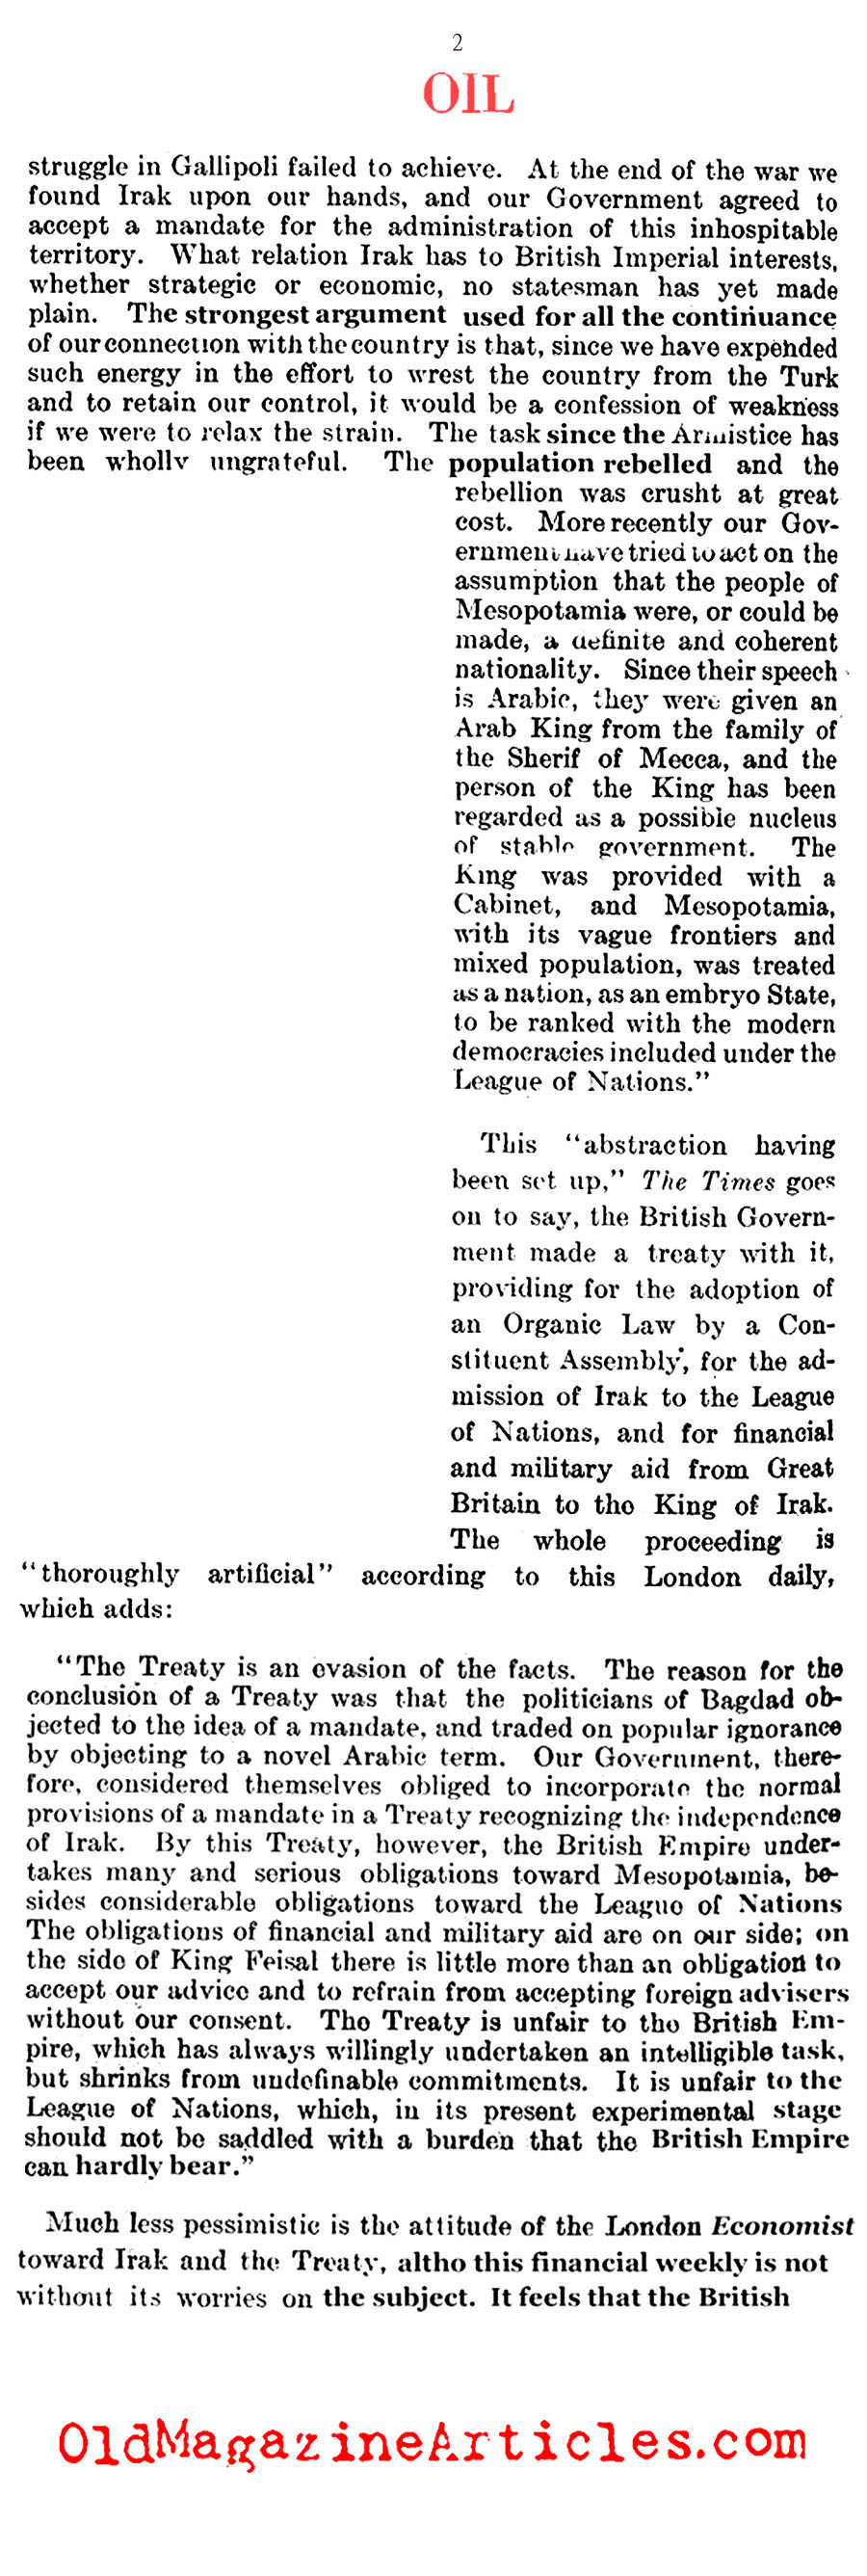 The Costliness of Mesopotamia (Literary Digest, 1922)